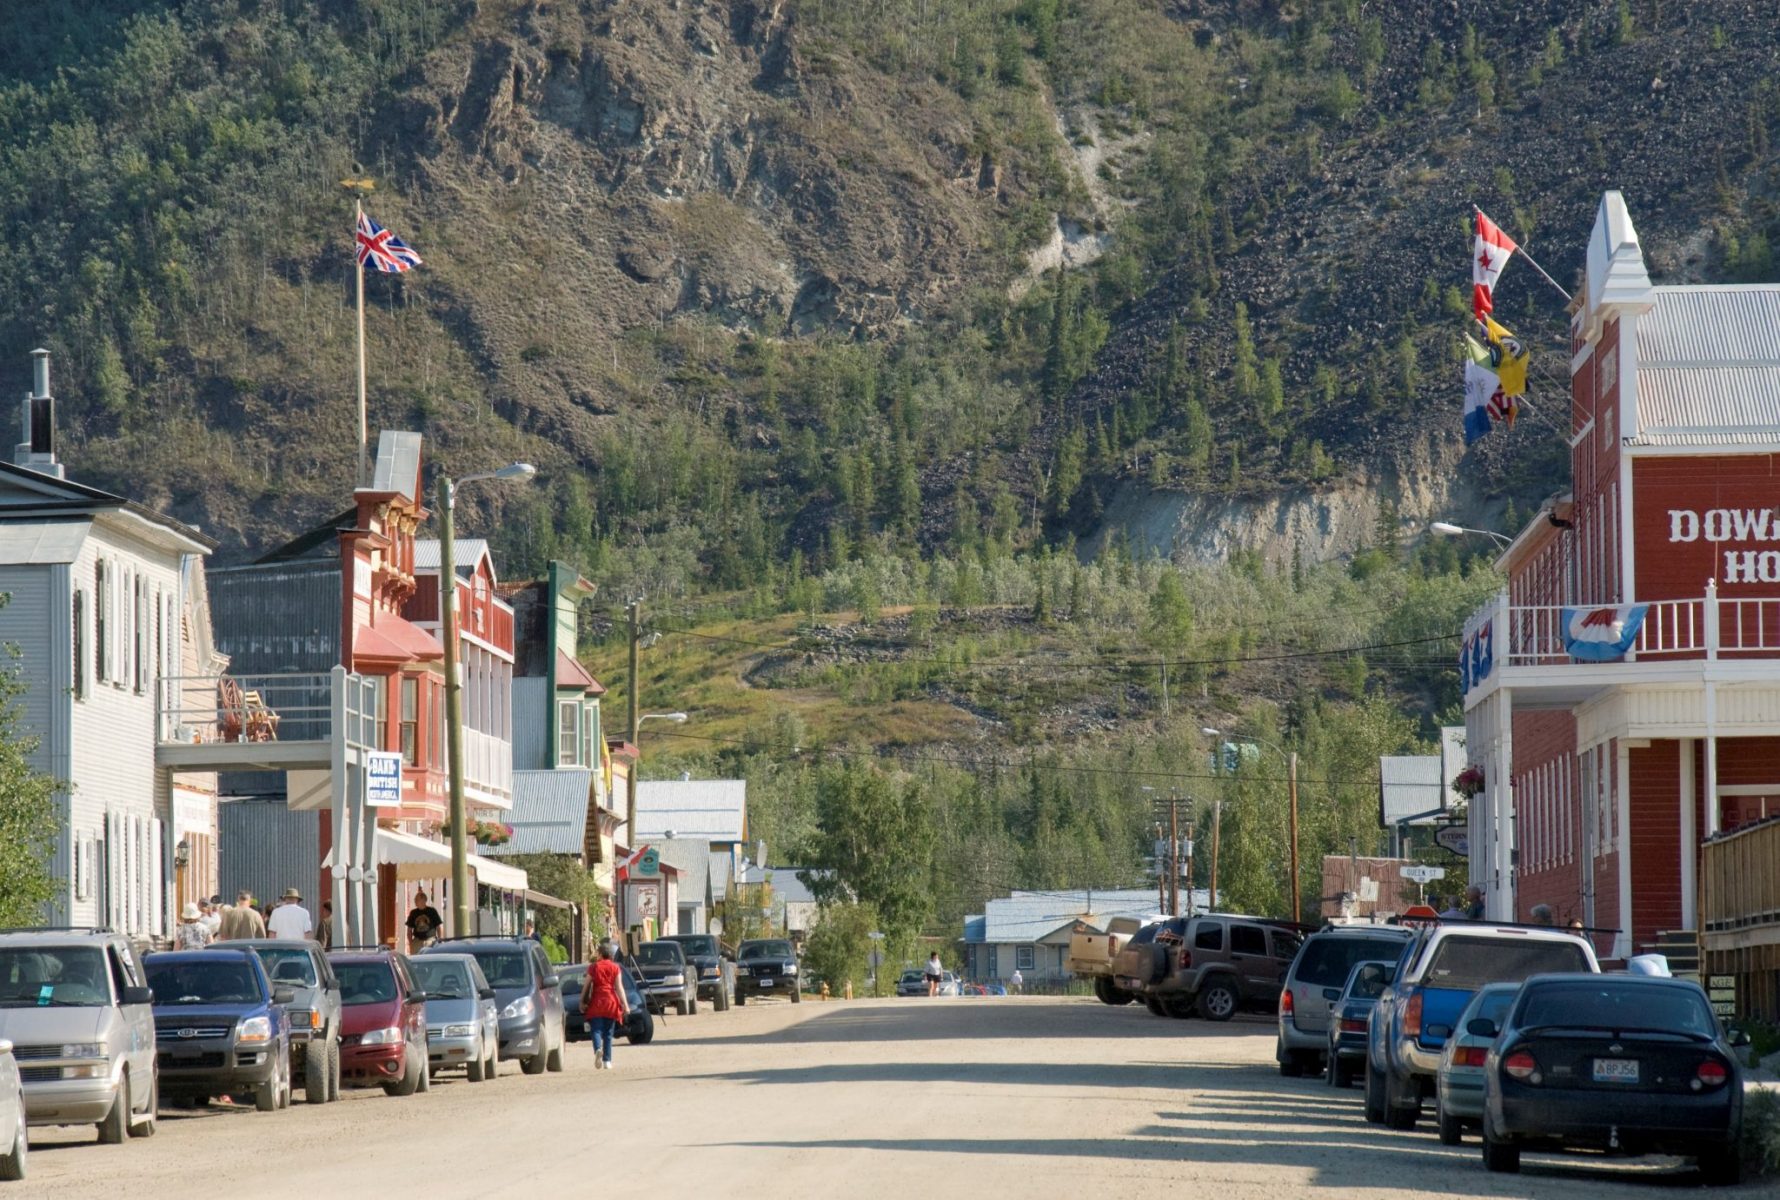 A gravel street in a small town lined with parked cars. The buildings are restored historic buildings. In the background in a forested hillside. Walking the historic streets is one of the best things to do in Dawson City